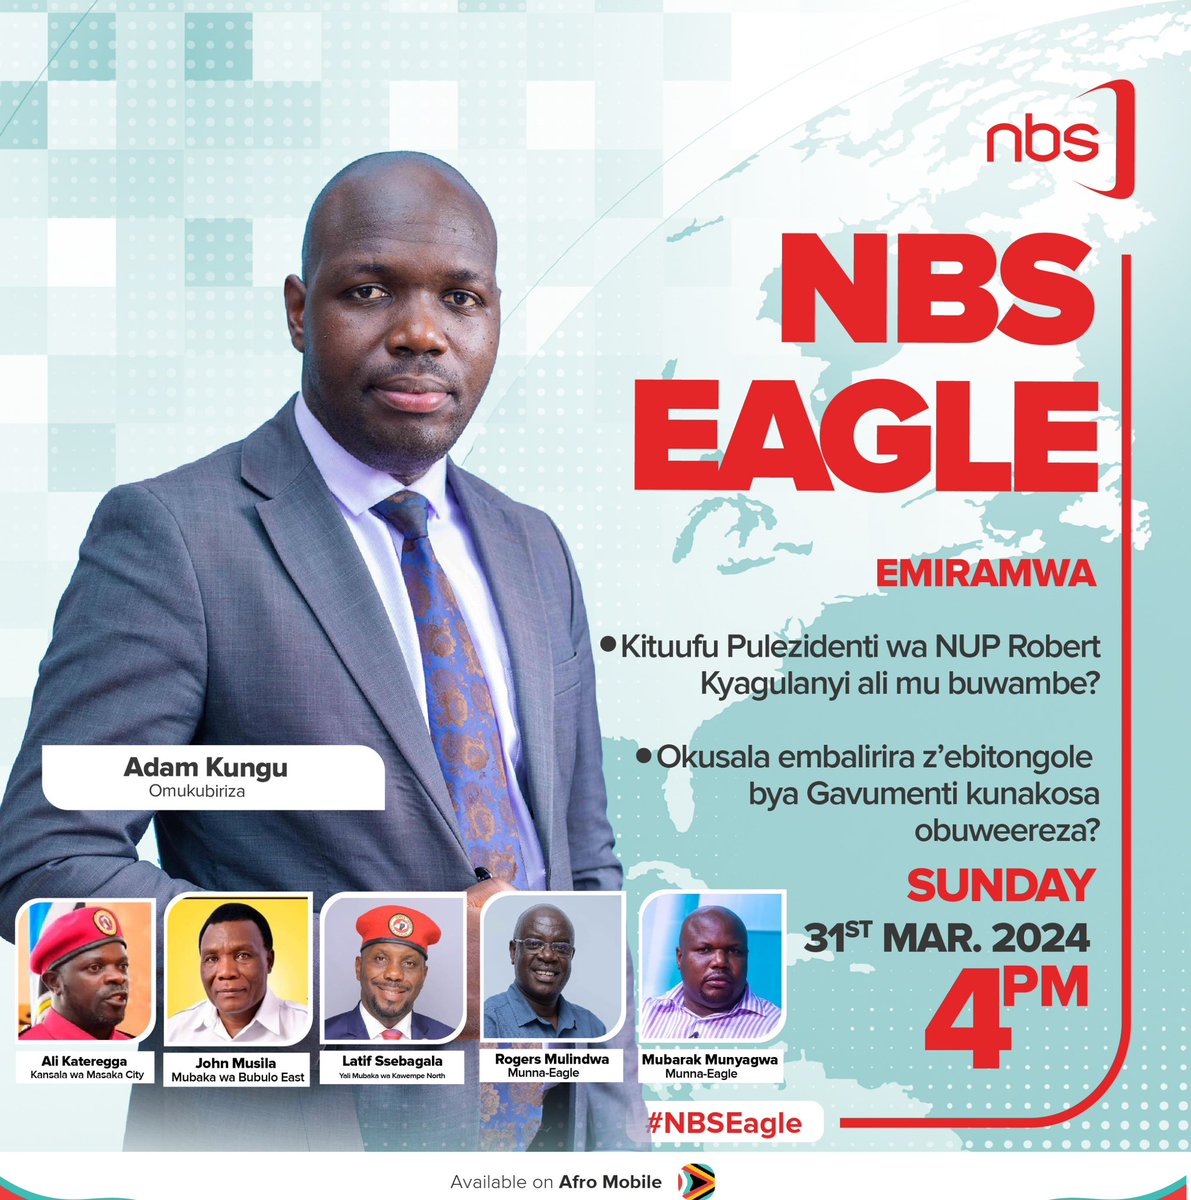 Hon. Mpuuga's claims that NUP President, Mr Kyagulanyi Ssentamu, is under siege, and the proposal to effect budget cuts, make our menu this afternoon on #NBSEagle at 4 PM. Please tune in.